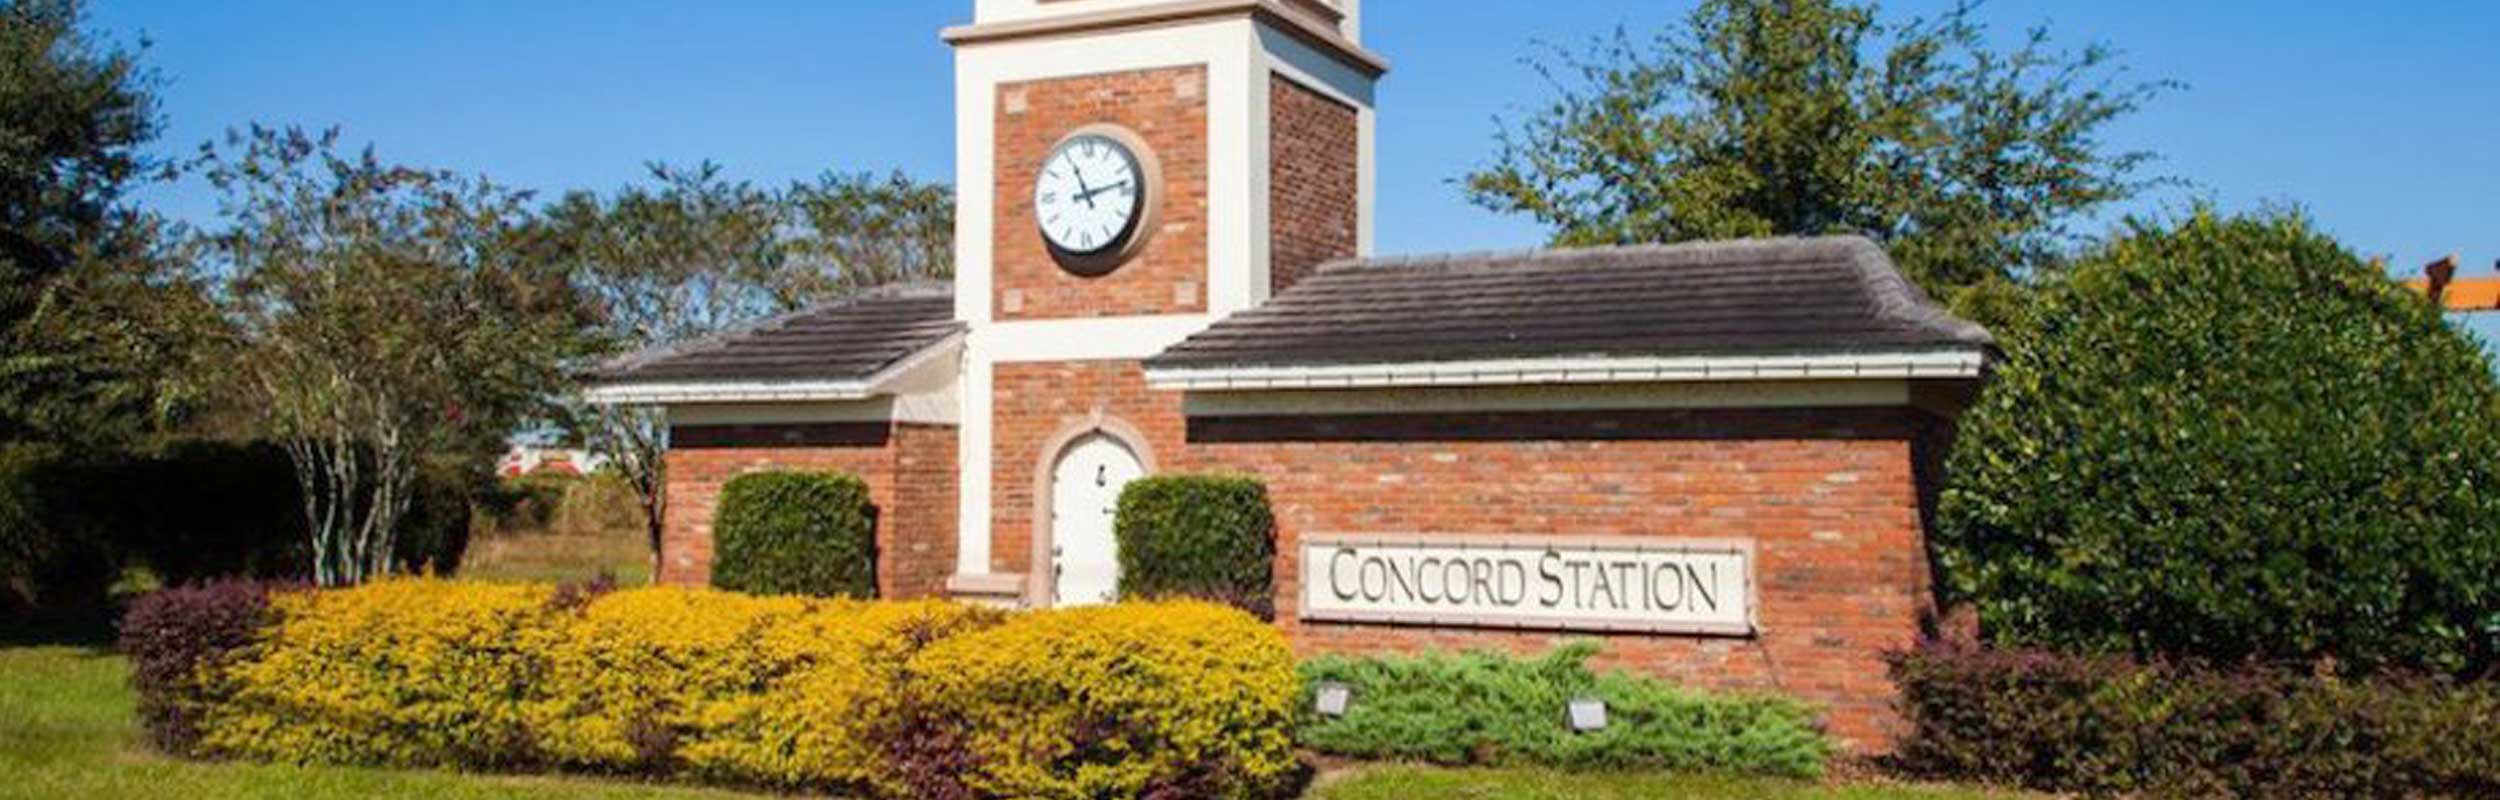 Concord Station Entrance